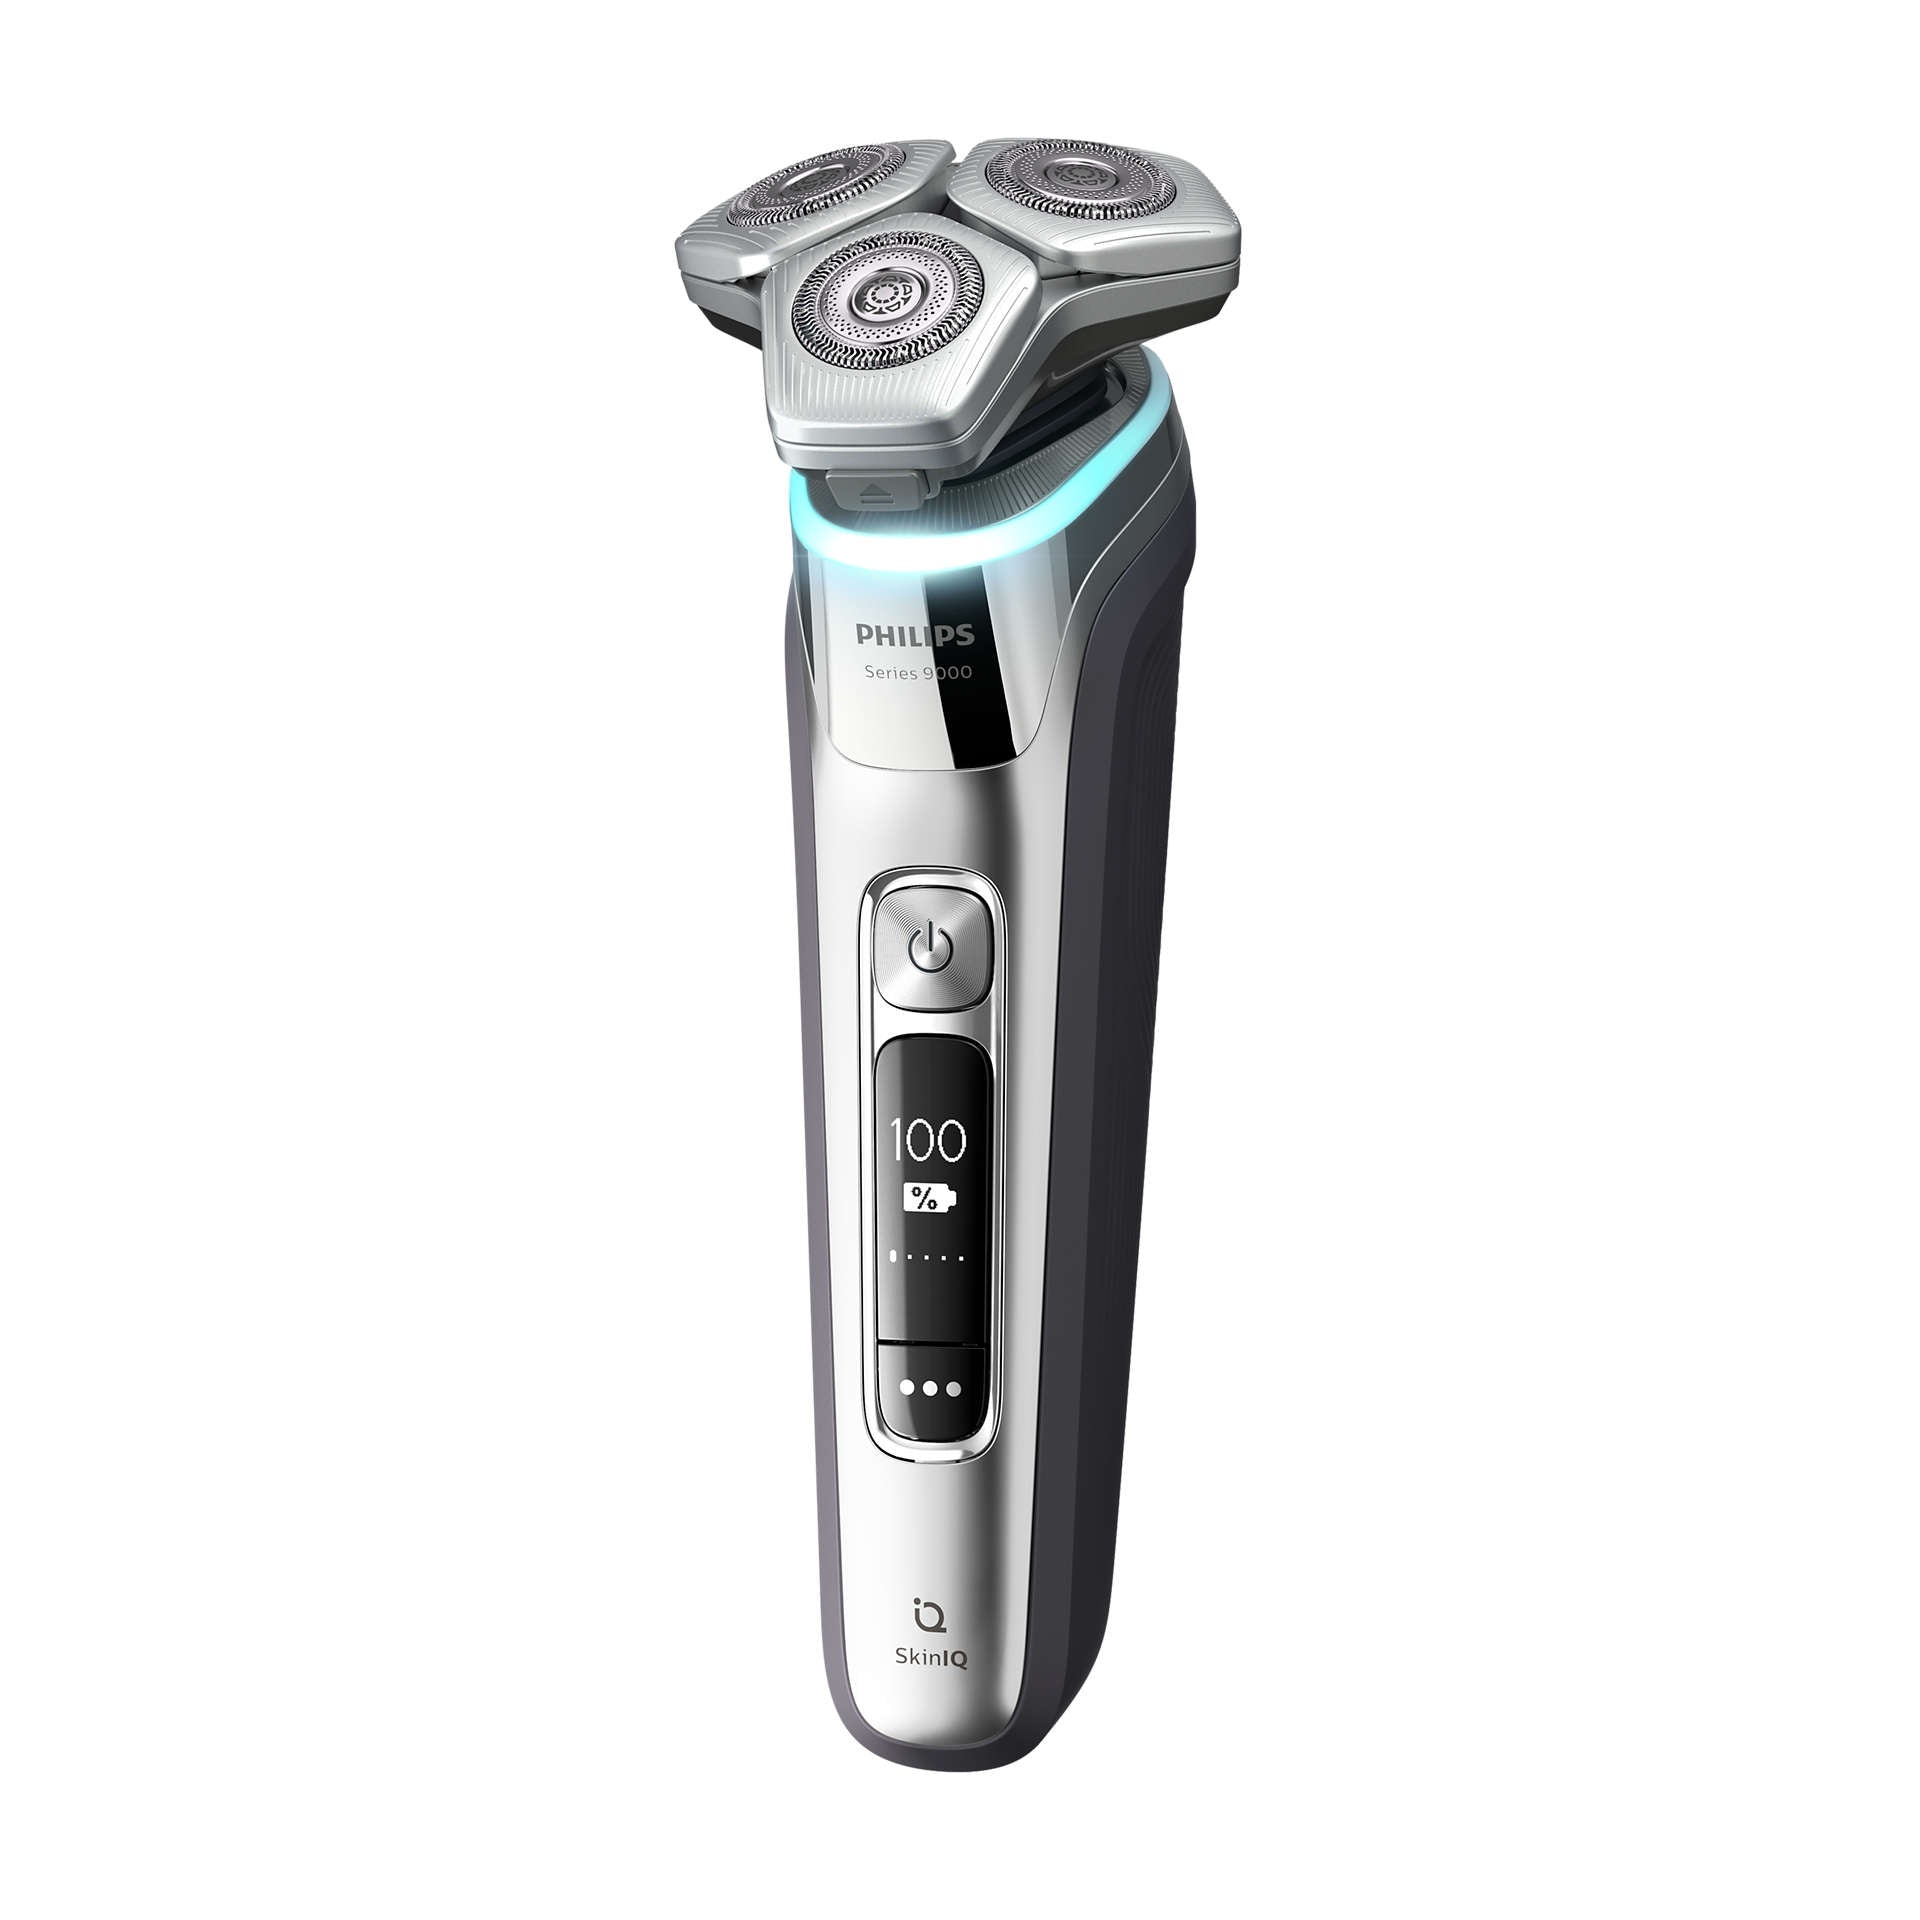 Philips Series 9000 Wet and Dry Electric Shaver S9985/50 with SkinIQ Technology